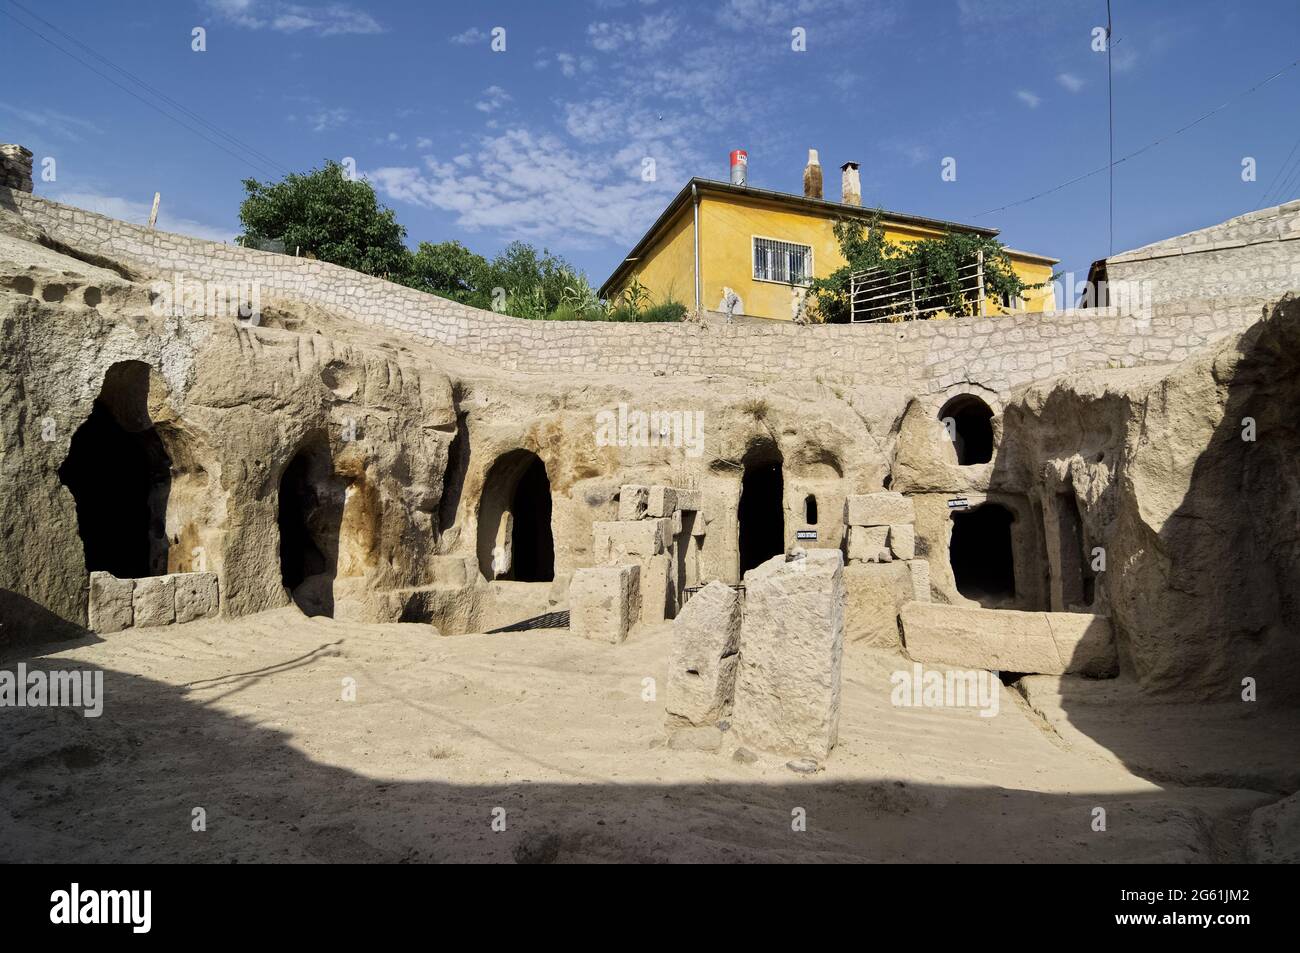 landmark of archaeology in Turkey the archaeological site of Gaziemir, an underground city of Cappadocia, was discovered in 2006 Stock Photo